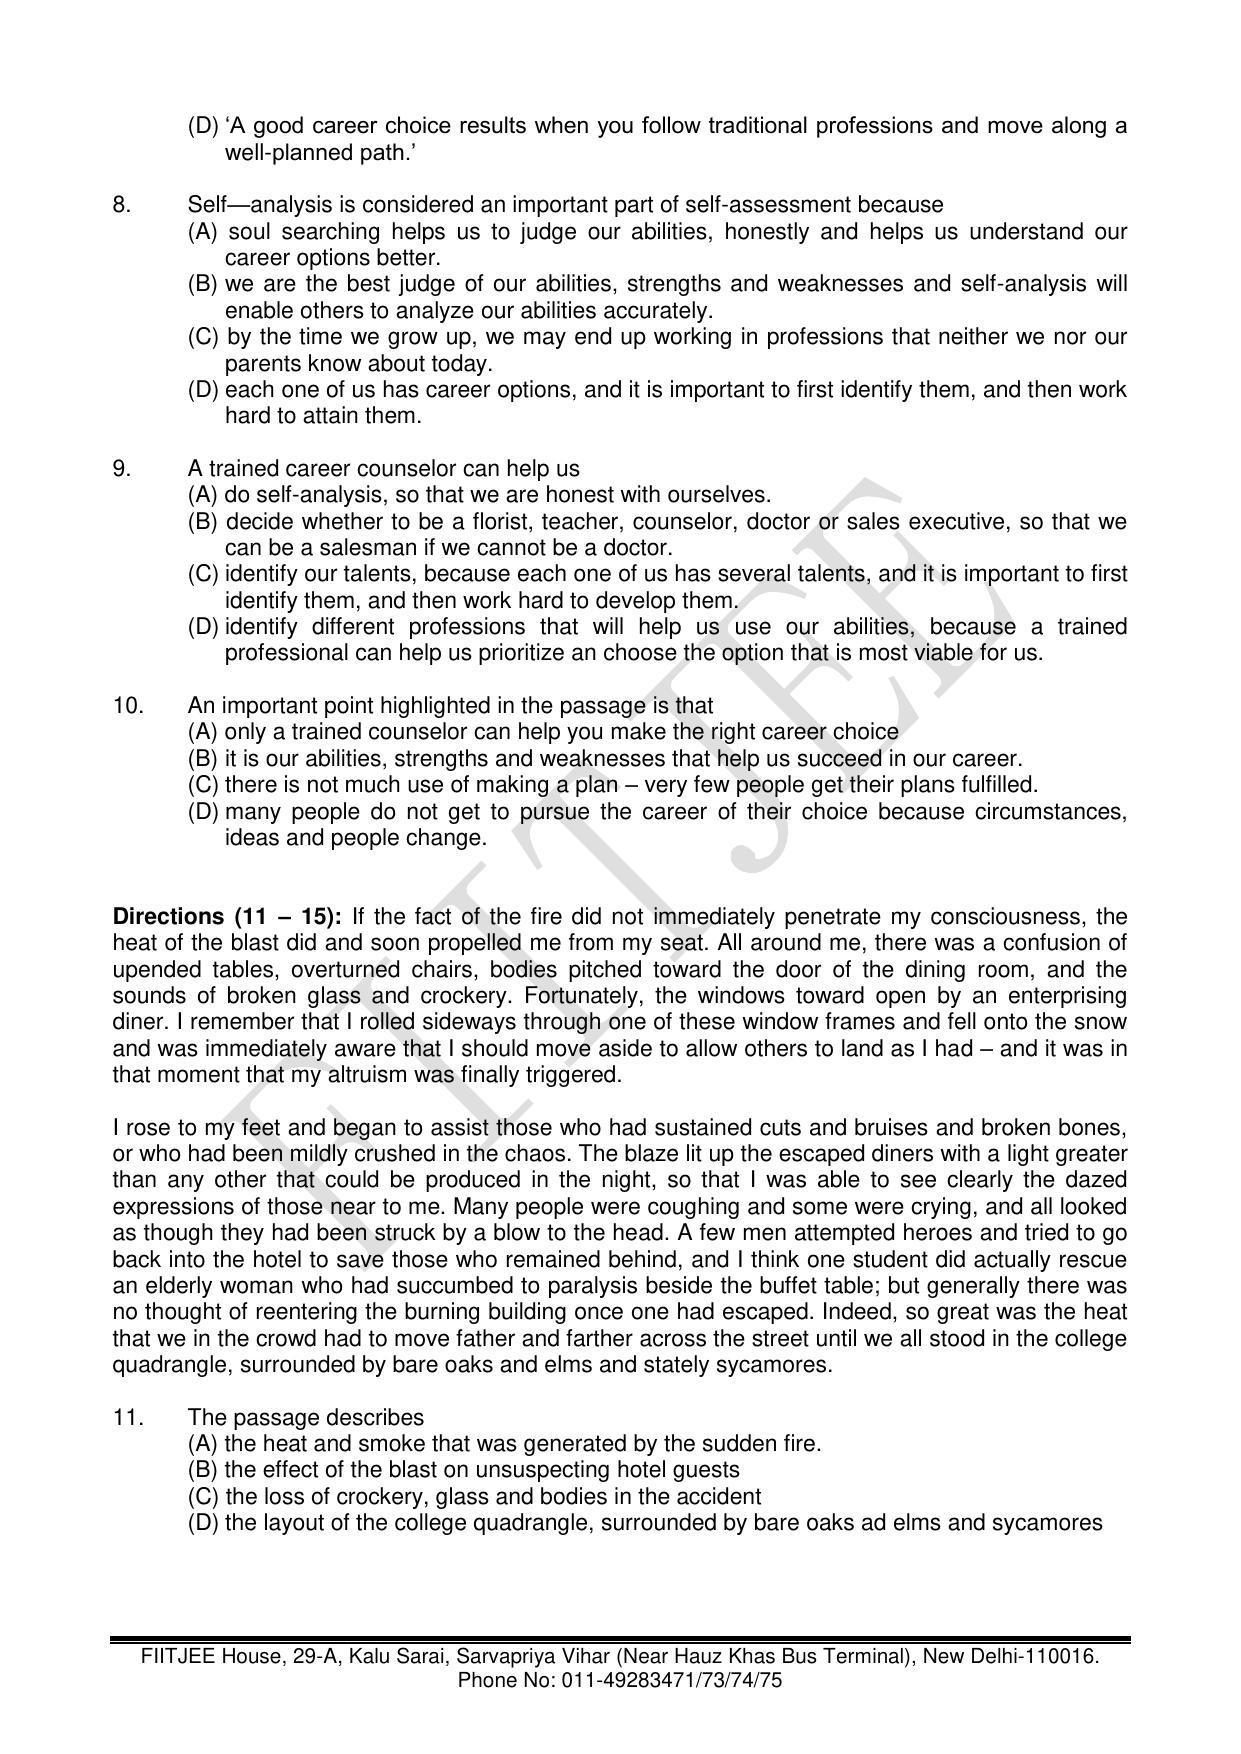 NTSE 2017 (Stage II) Language (LCT) Question Paper (May 14, 2017) - Page 3